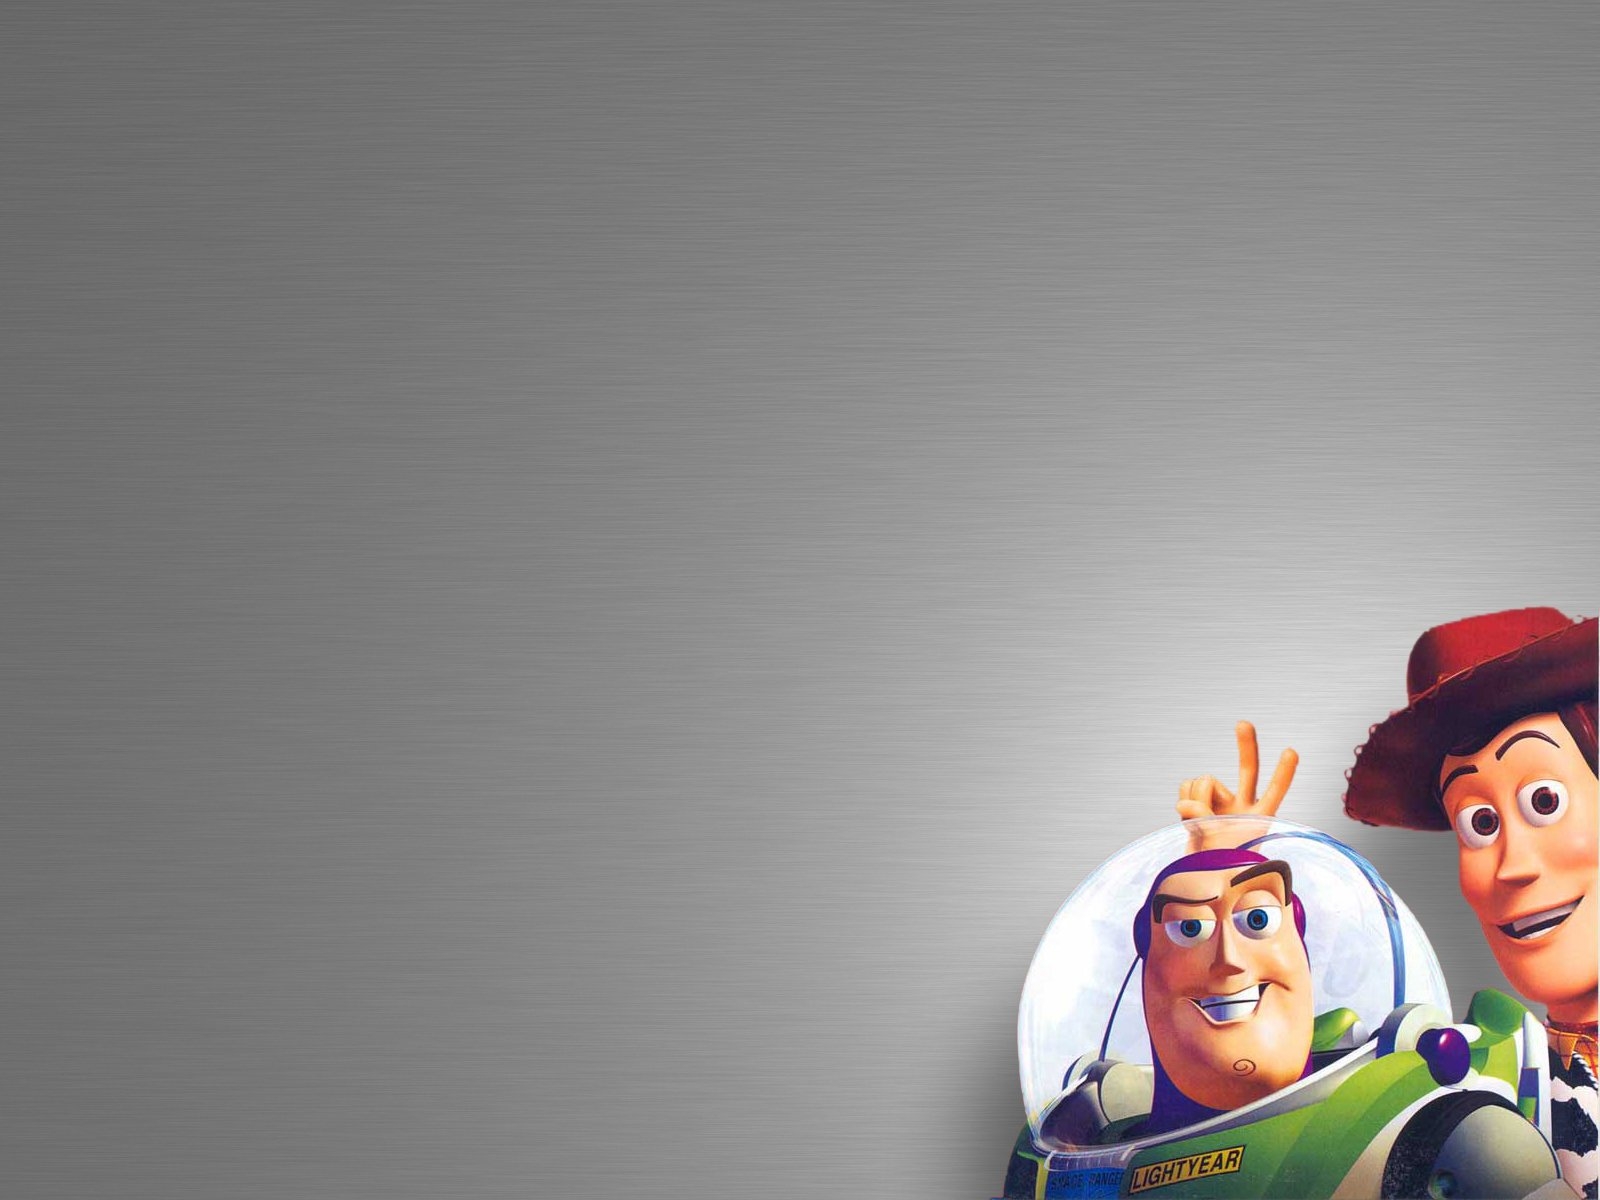 Buzz Lightyear wallpapers for desktop, download free Buzz Lightyear  pictures and backgrounds for PC 